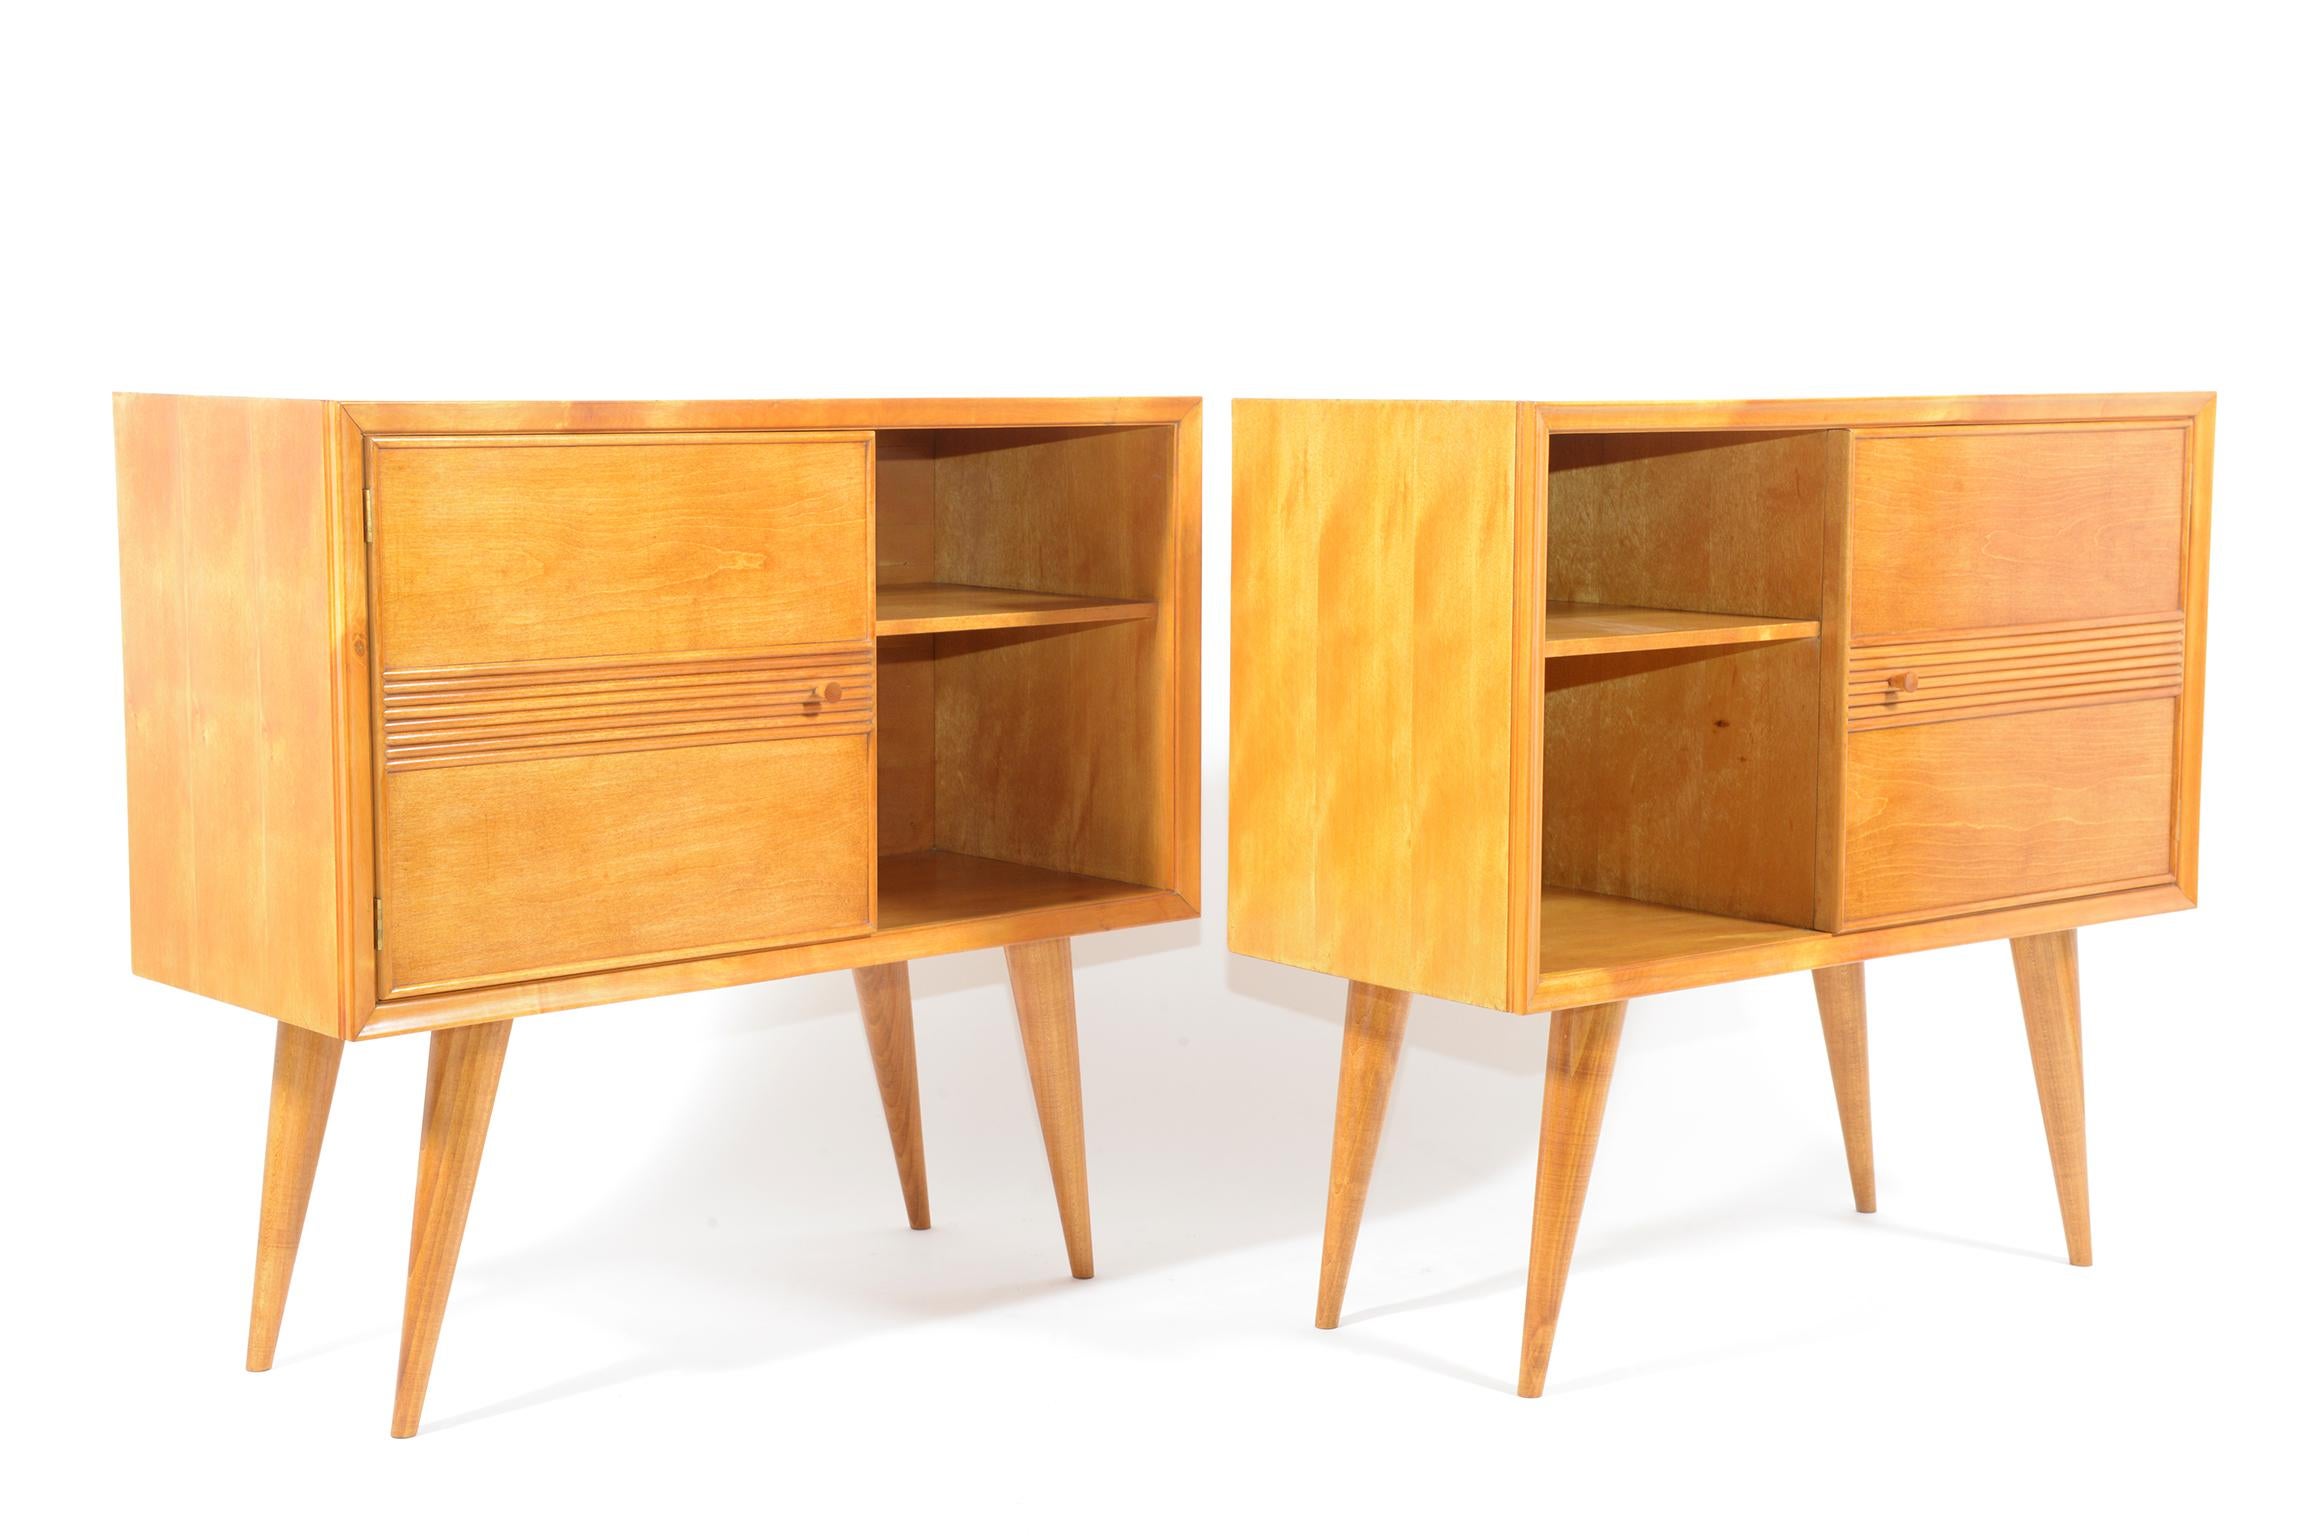 Mid century Italian pair of satin wood cabinet slender conic legs, doors with shelve inside.
This pair of cabinets belong to a holiday home projected by Pier Giulio Magistretti in the 1940.
Thanks to their size they can be used like cabinets or